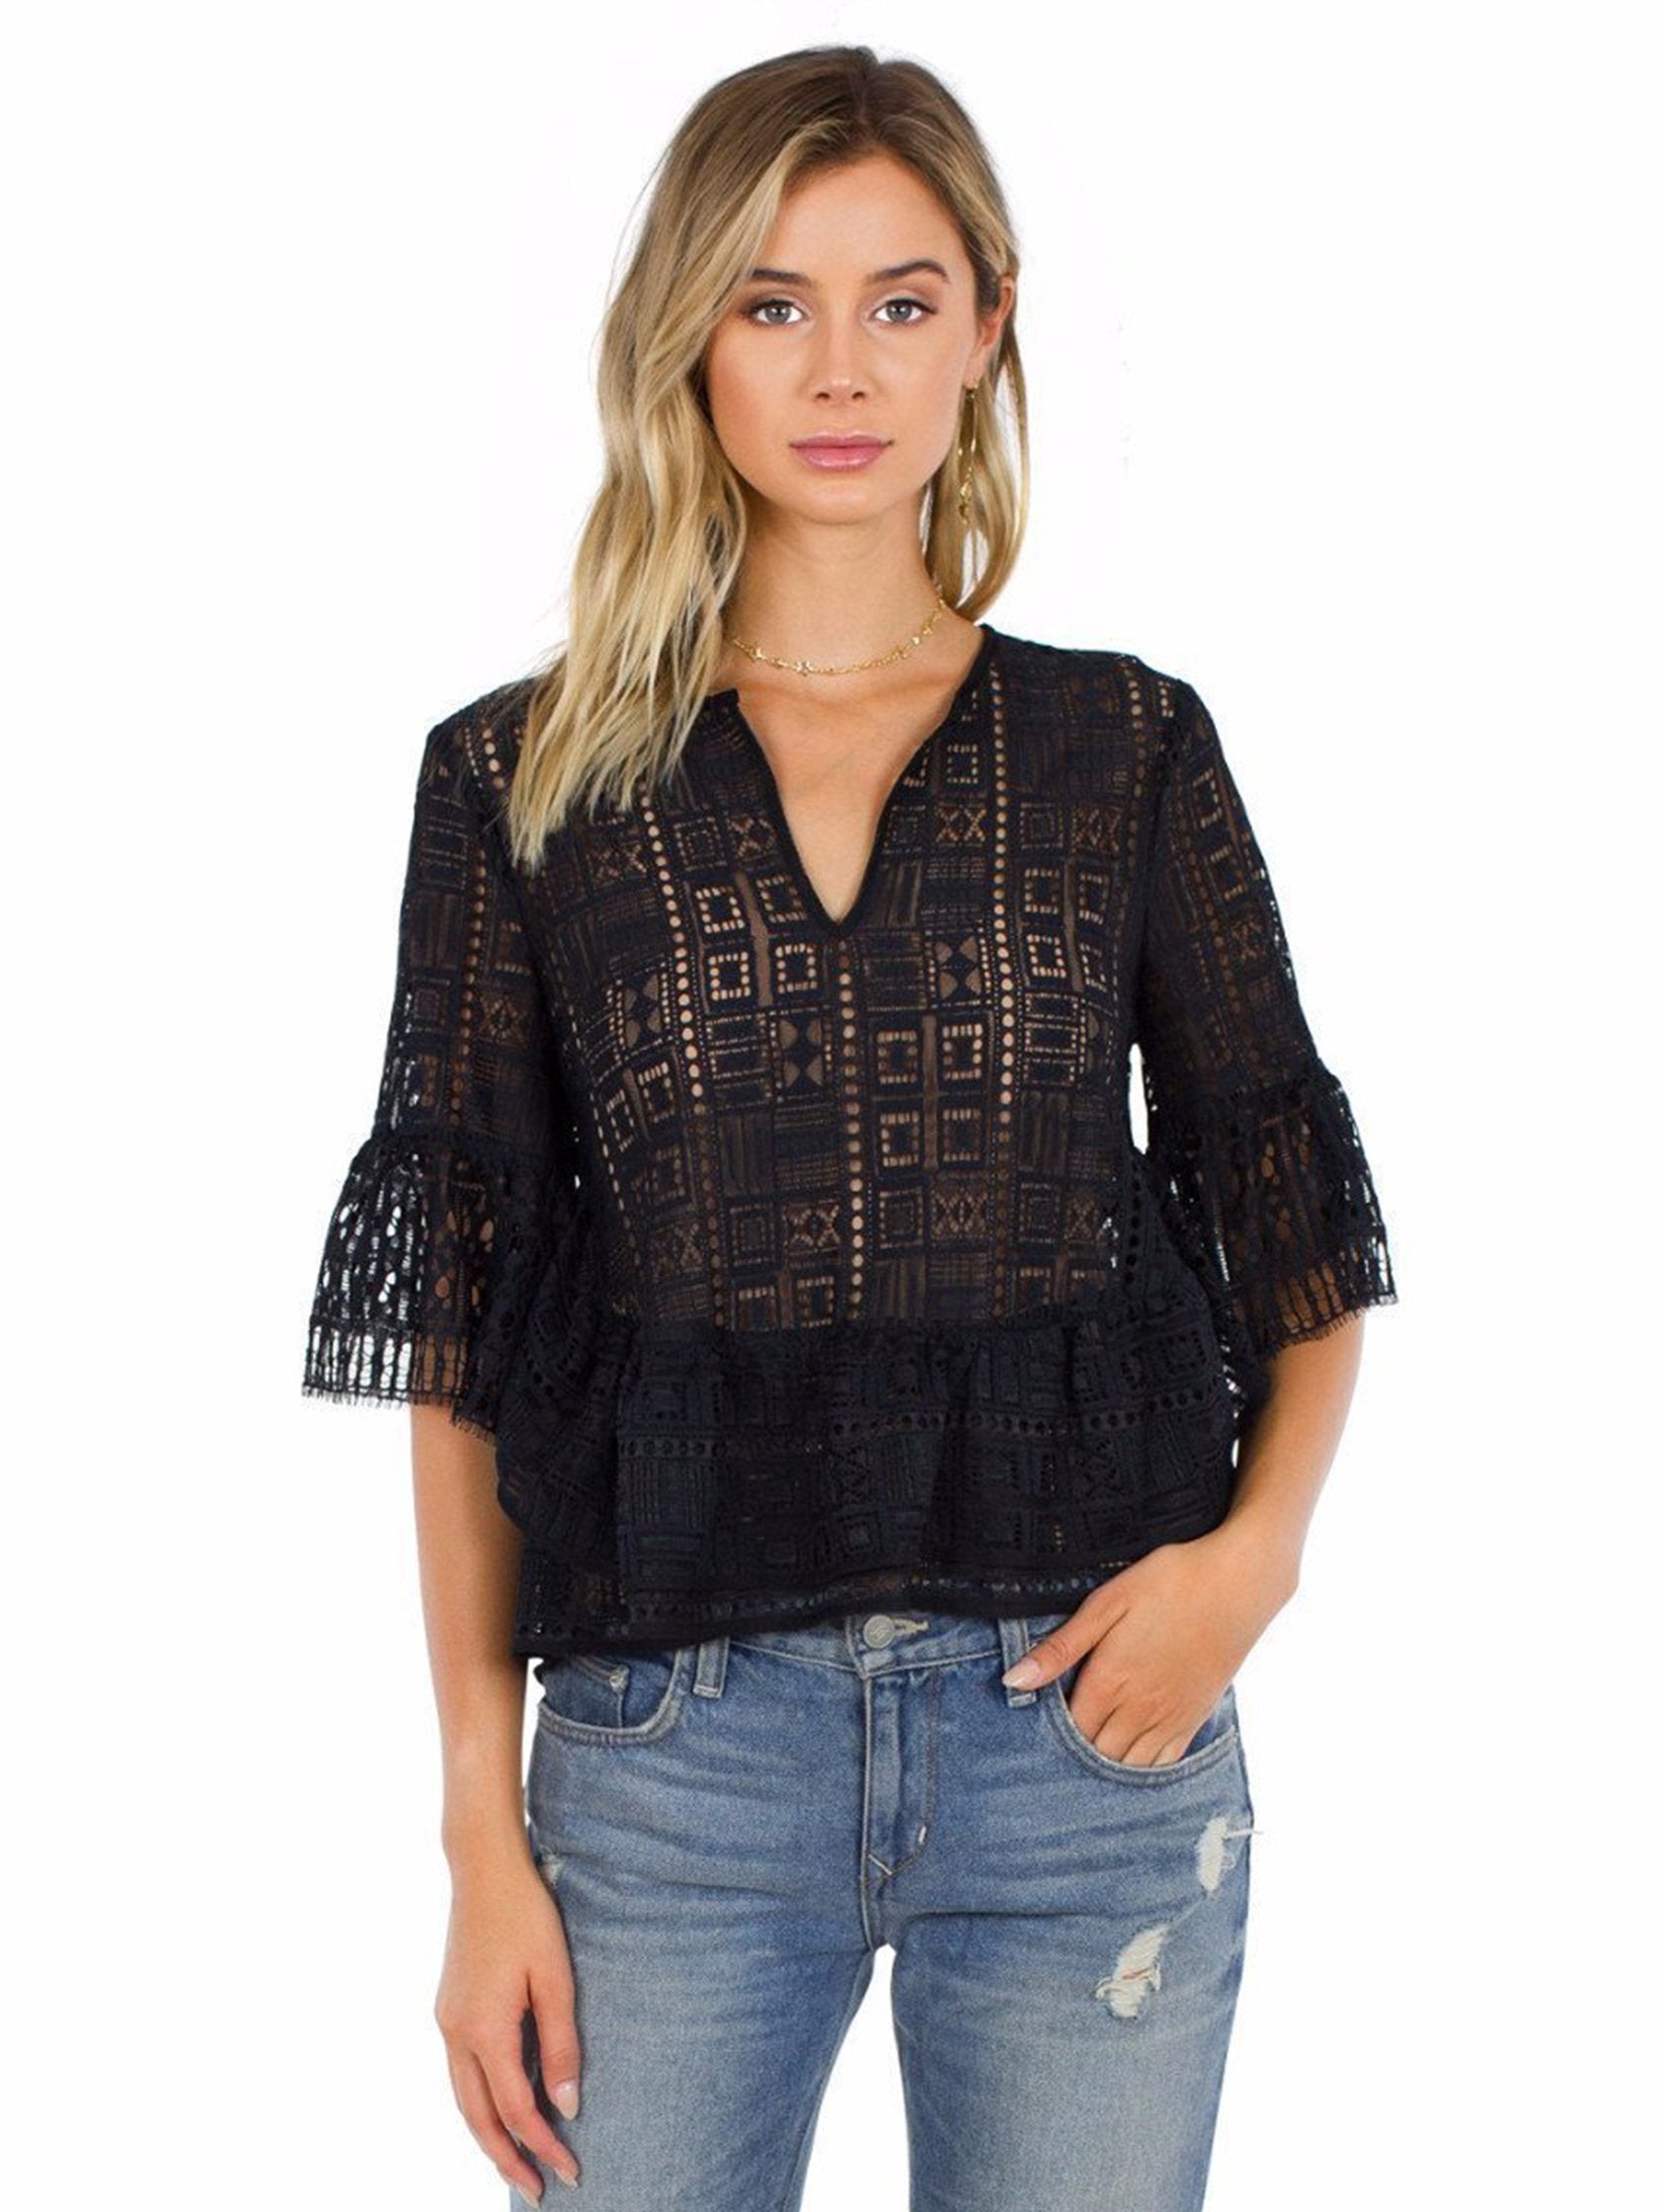 Woman wearing a top rental from BCBGMAXAZRIA called Immane Ruffled Lace Top